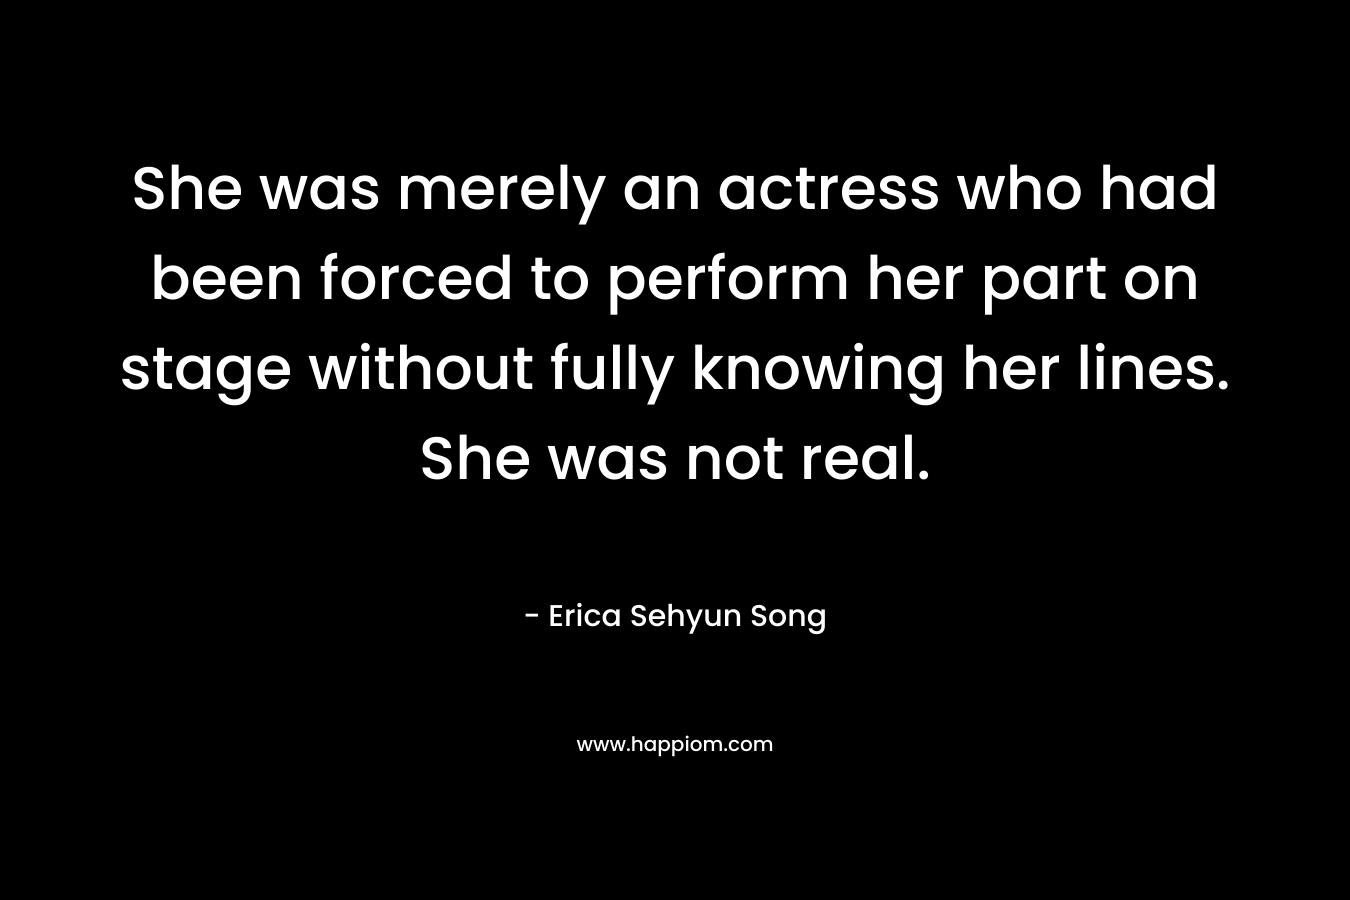 She was merely an actress who had been forced to perform her part on stage without fully knowing her lines. She was not real.